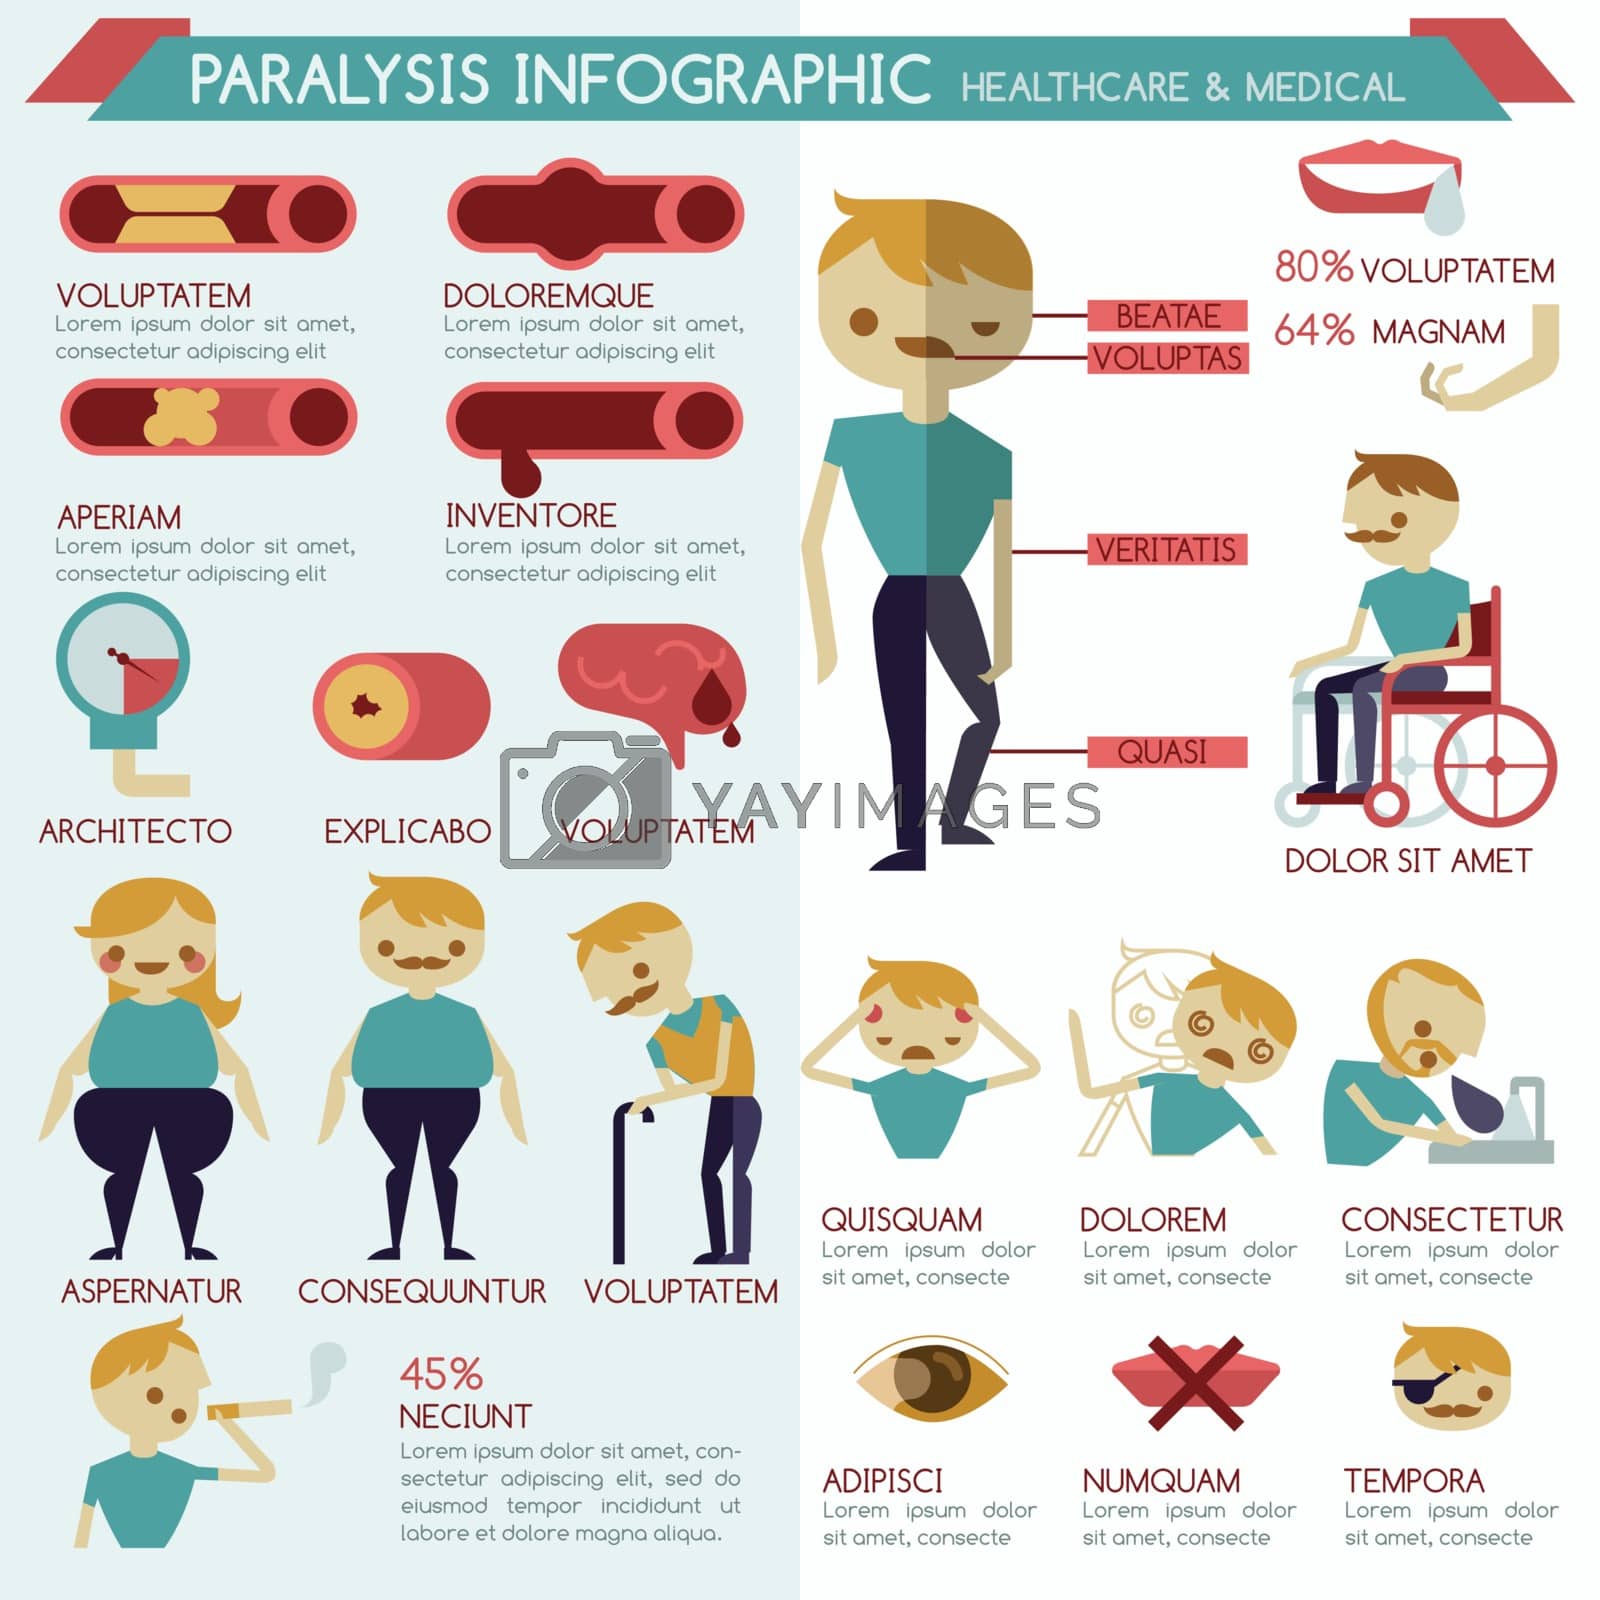 Royalty free image of Paralysis infographic healthcare and medical by kninwong